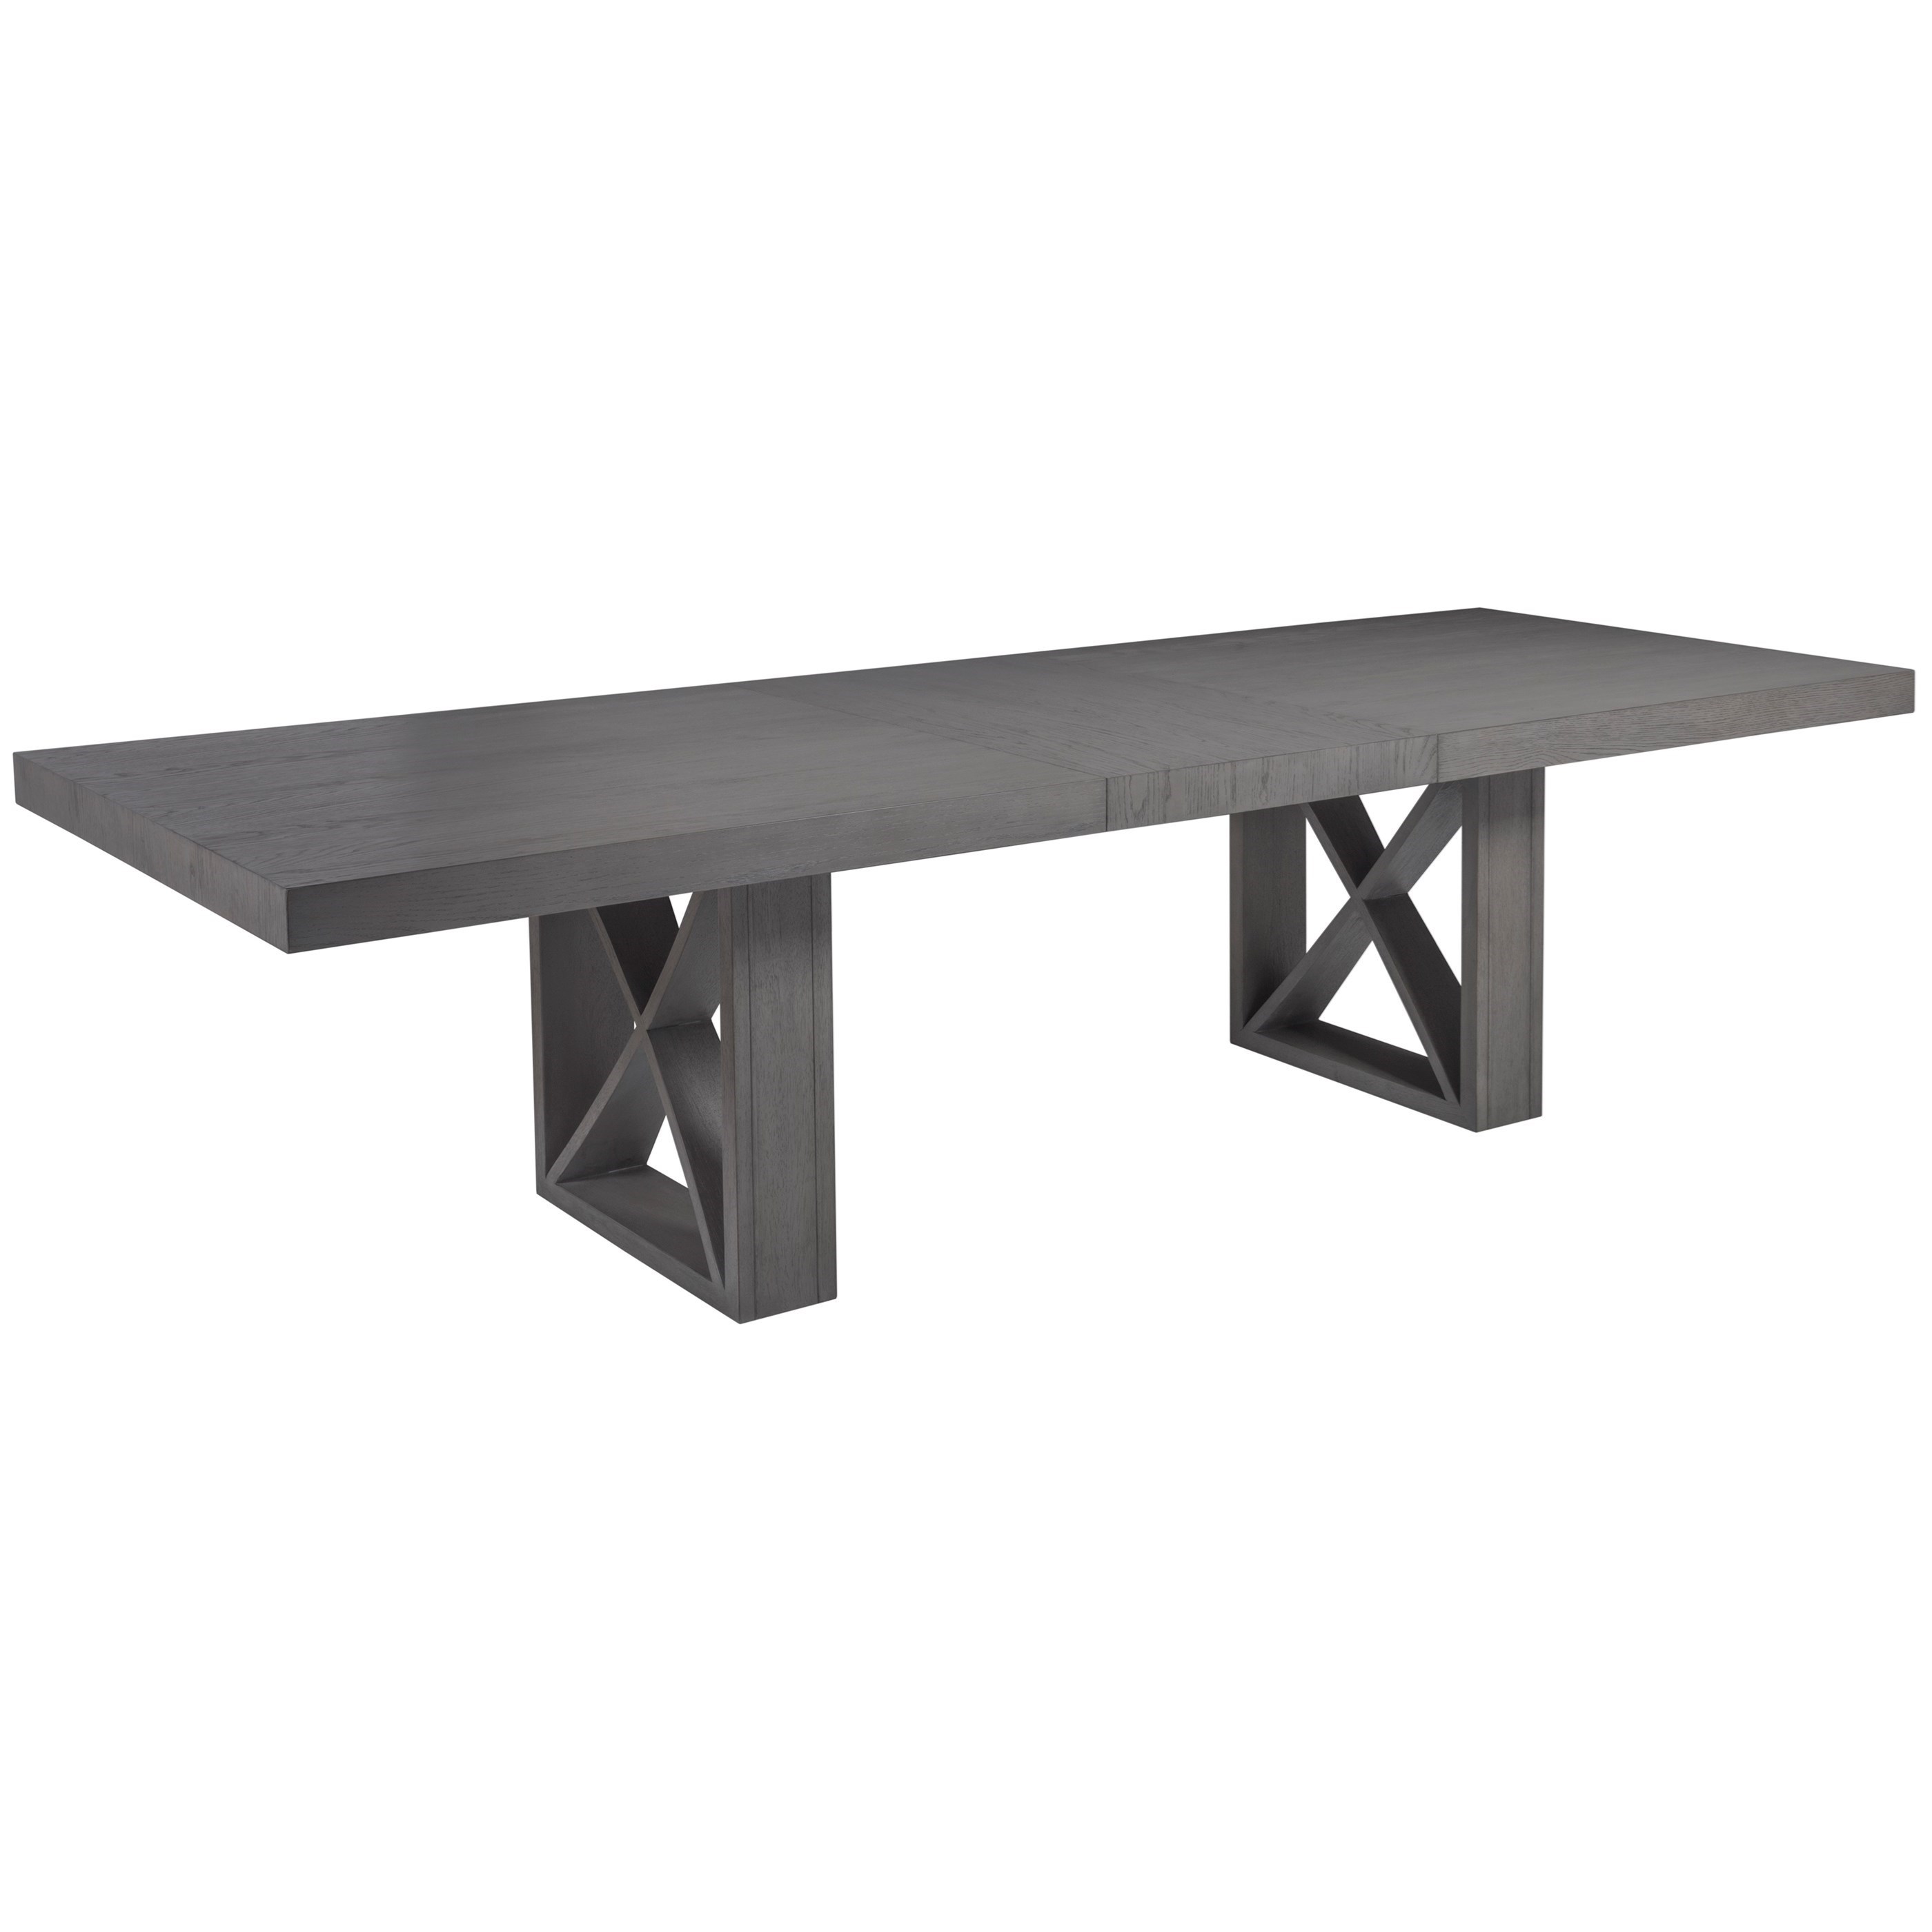 Transitional Rectangular Gray Dining Table with X-Pedestal Bases